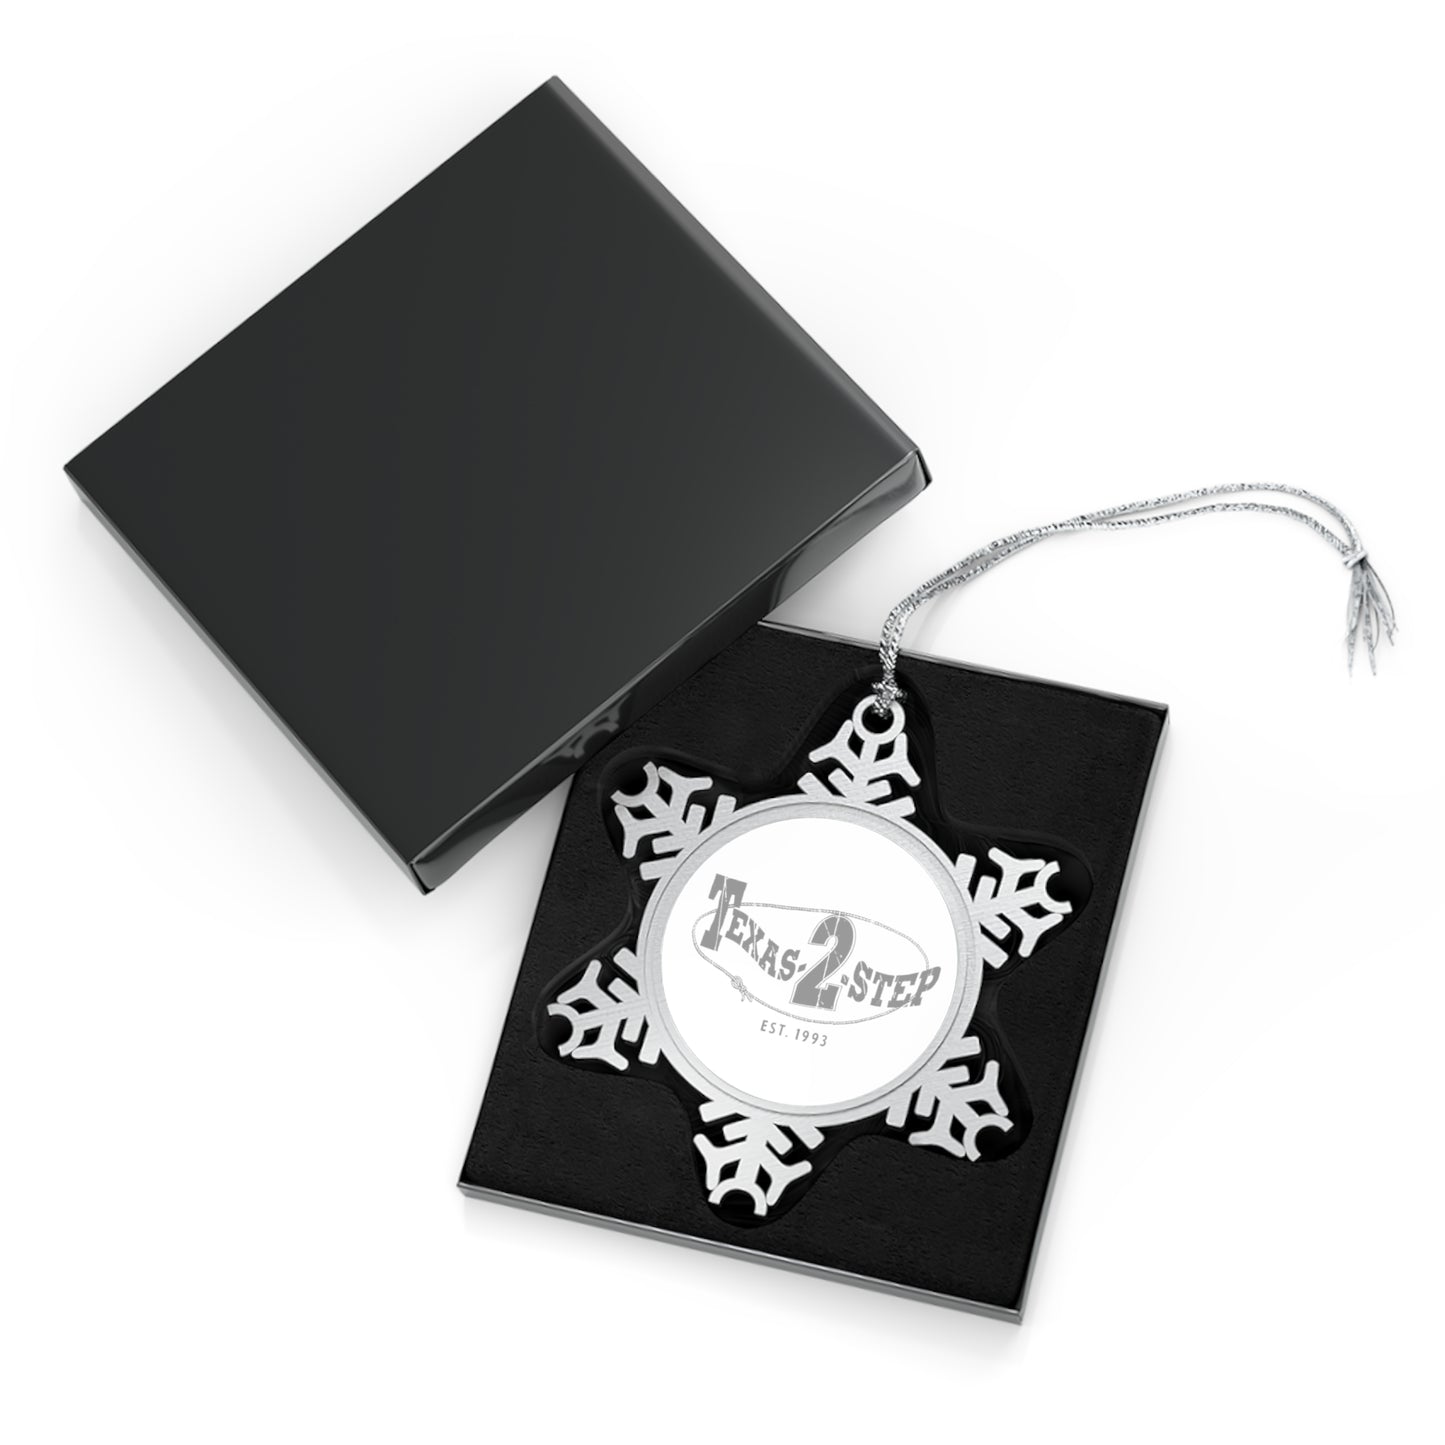 T2S Pewter Snowflake Ornament (T2S logo front-white, blank back)